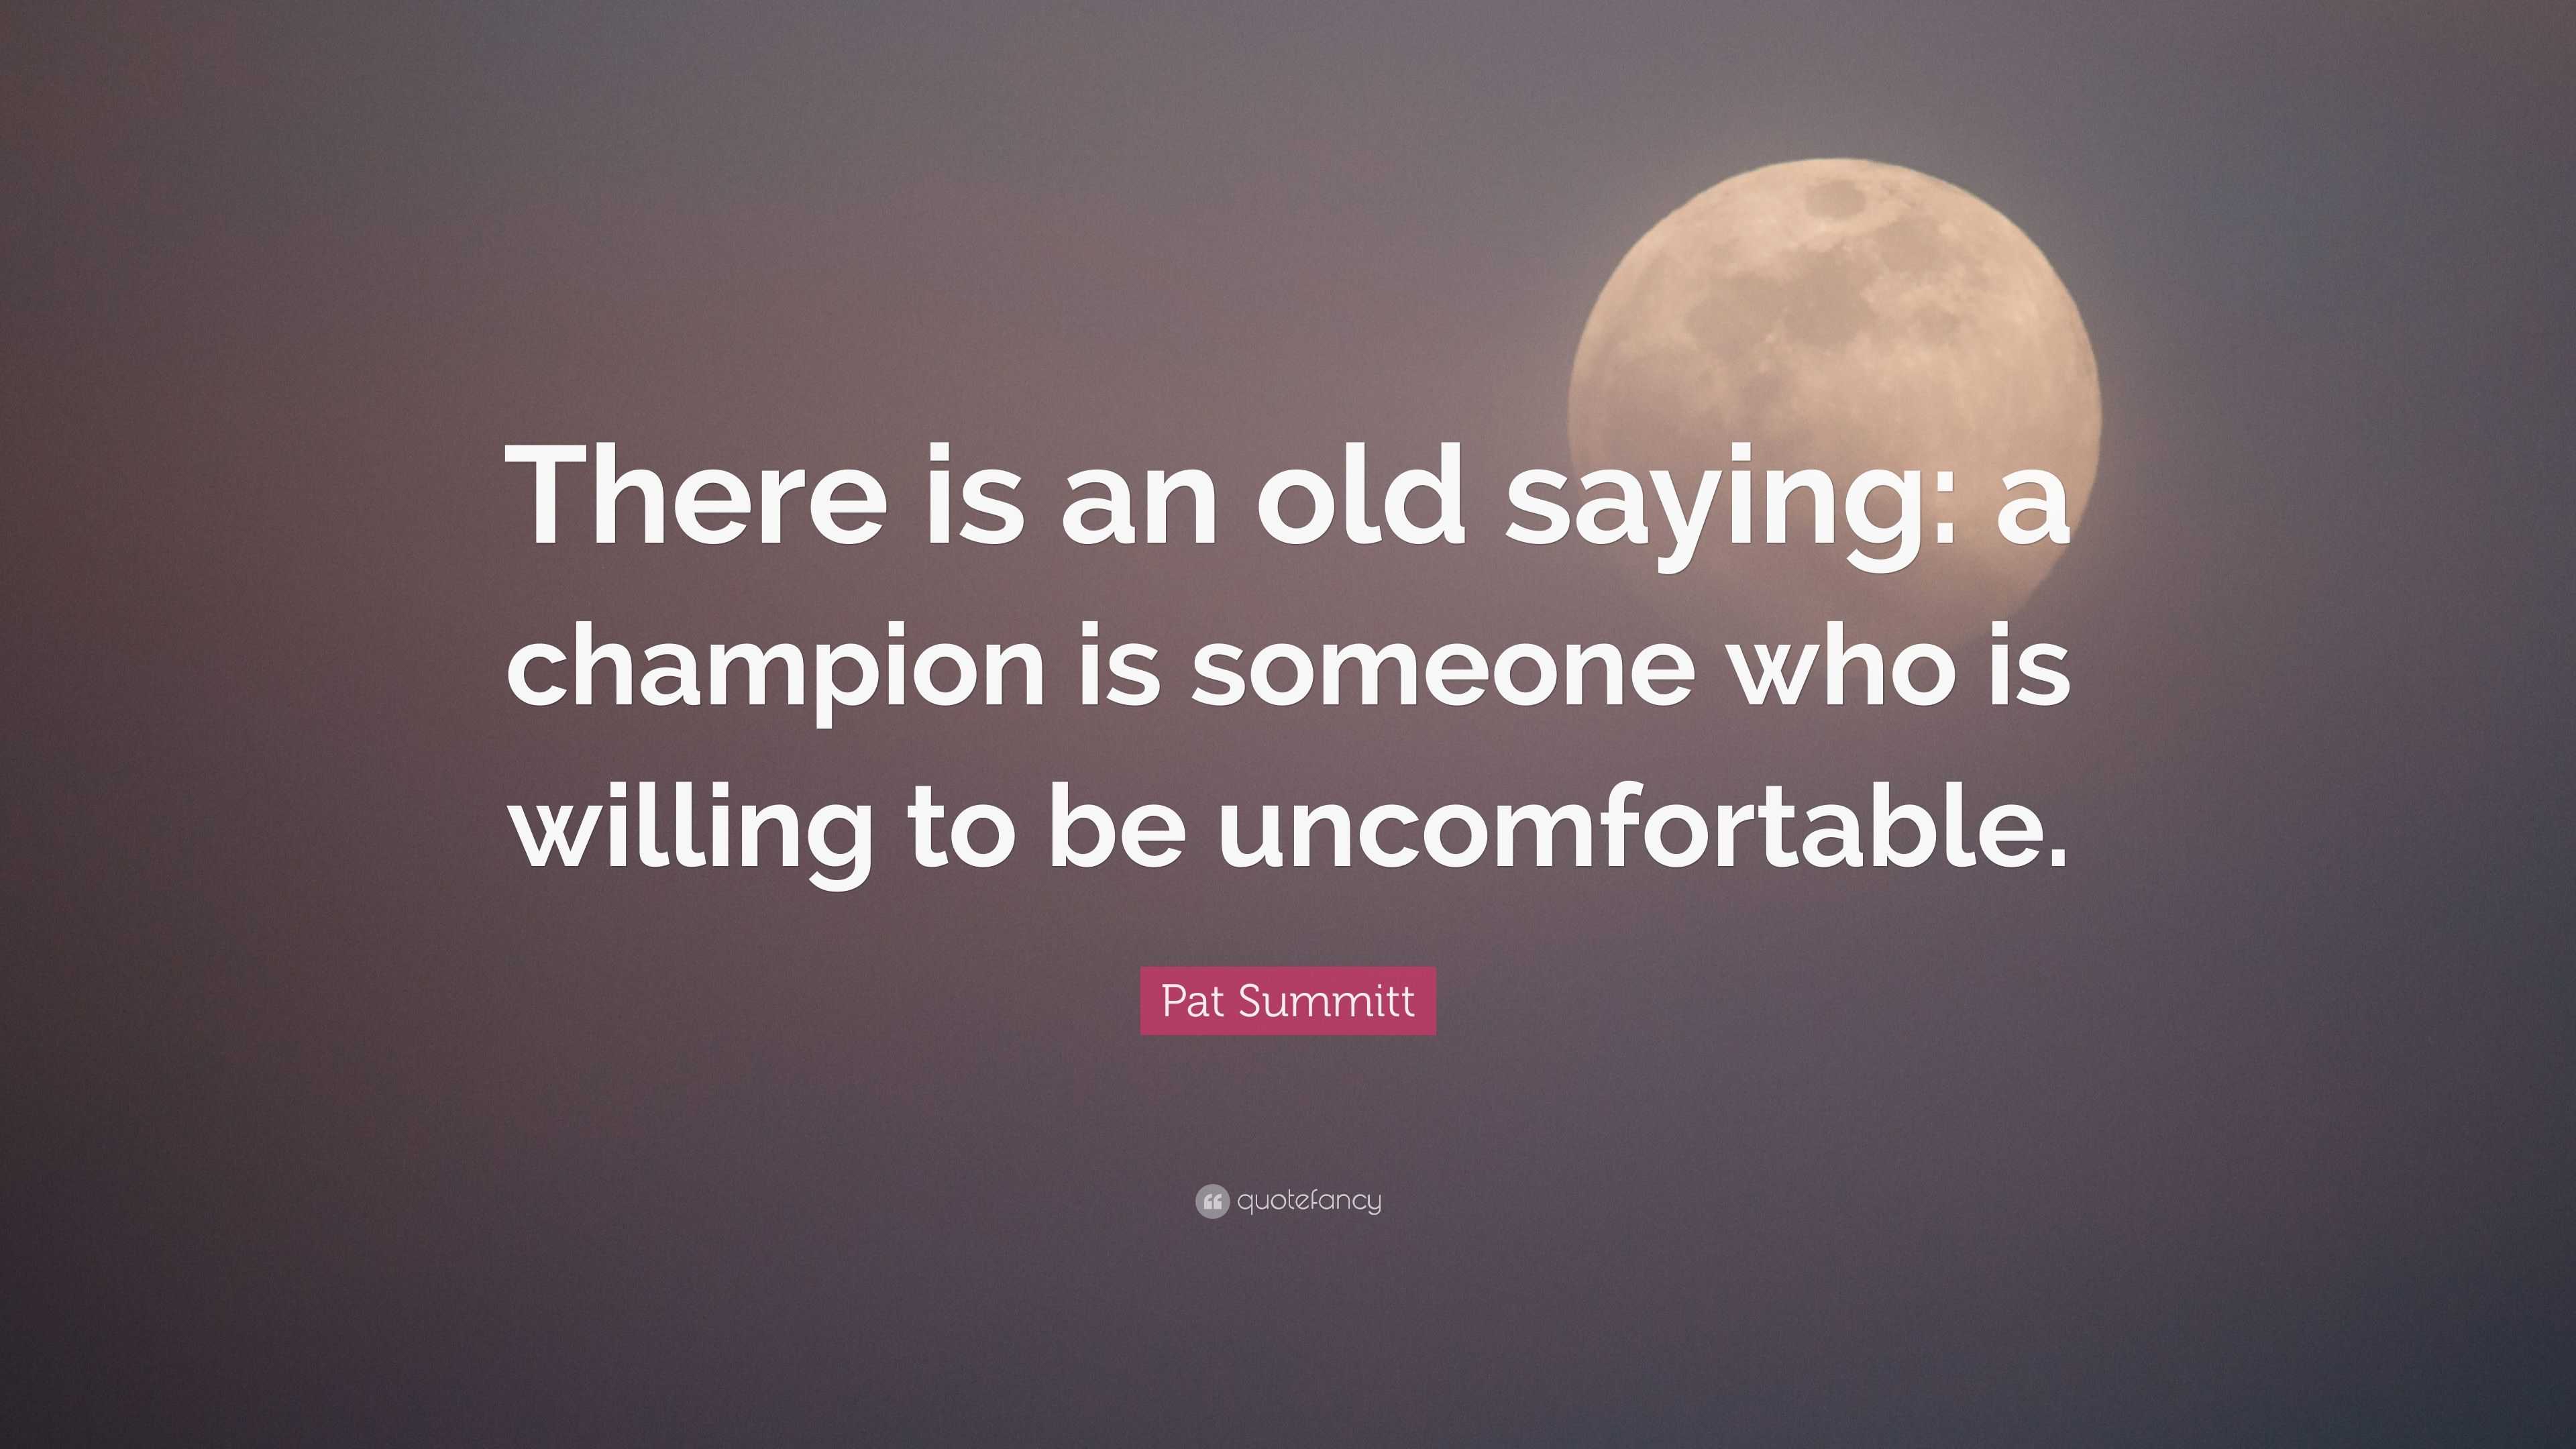 Summitt “There is an old a champion someone who is willing to